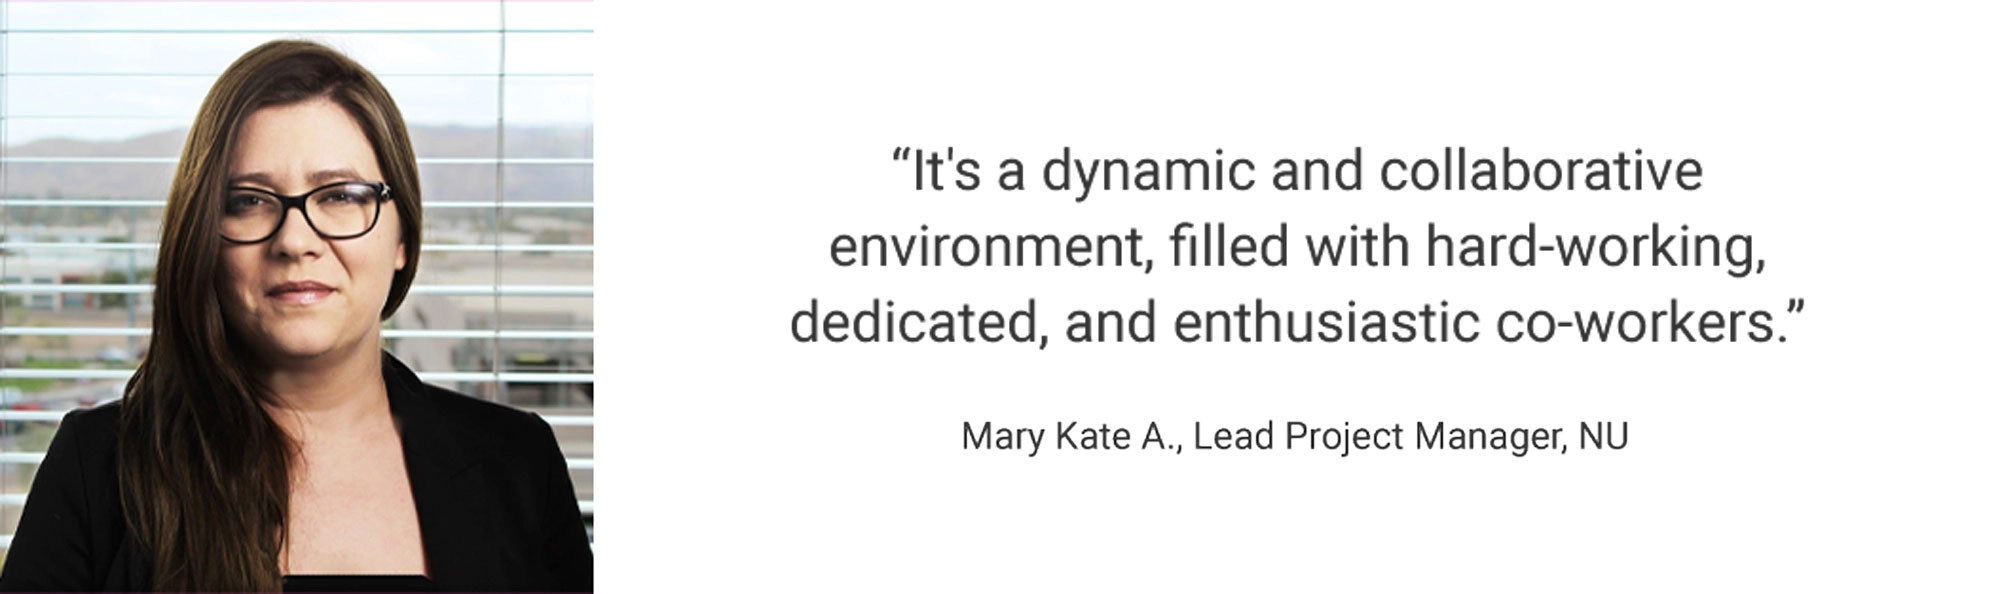 Employee Testimonial, "It's a dynamic and collaborative environment, filled with hard-working, dedicated, and enthusiastic co-workers." Mary Kate A., Lead Project Manager, NUS